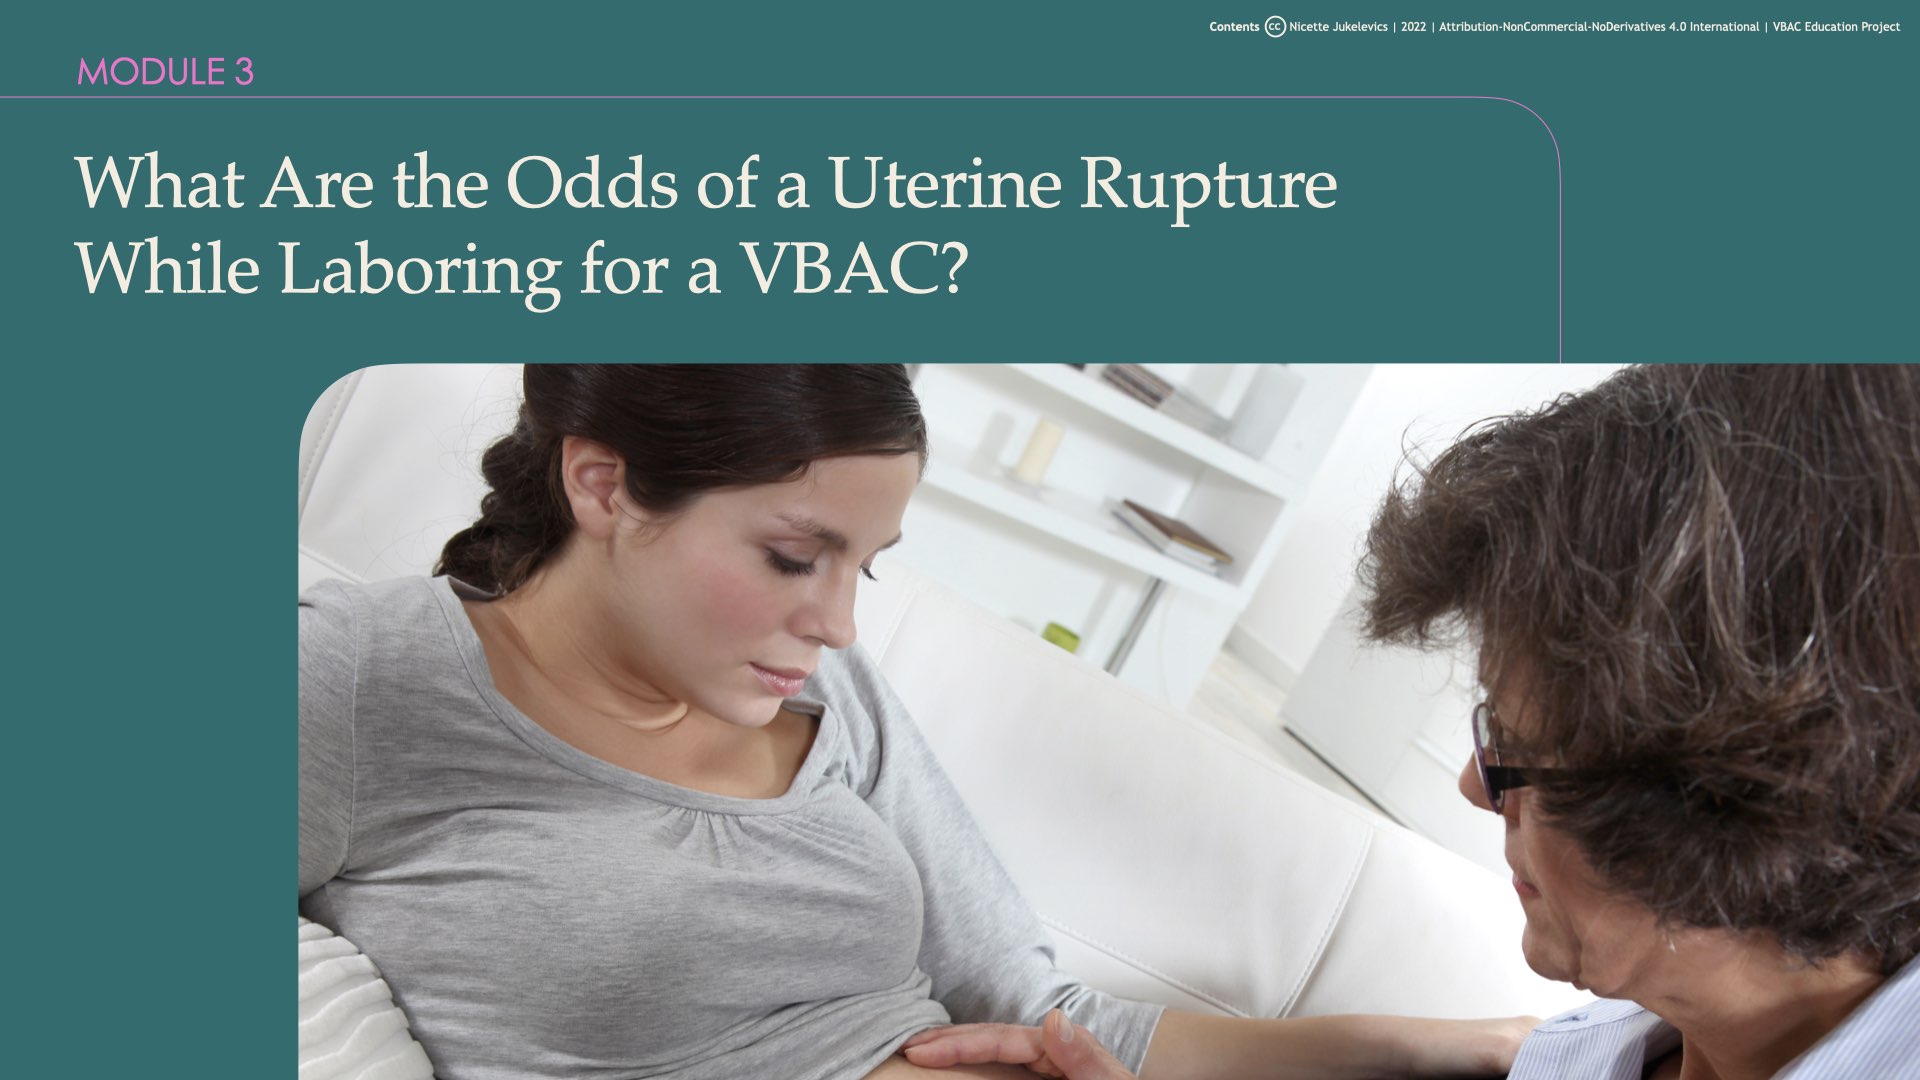 Module 3: What Are the Odds of a Uterine Rupture While Laboring for a VBAC?